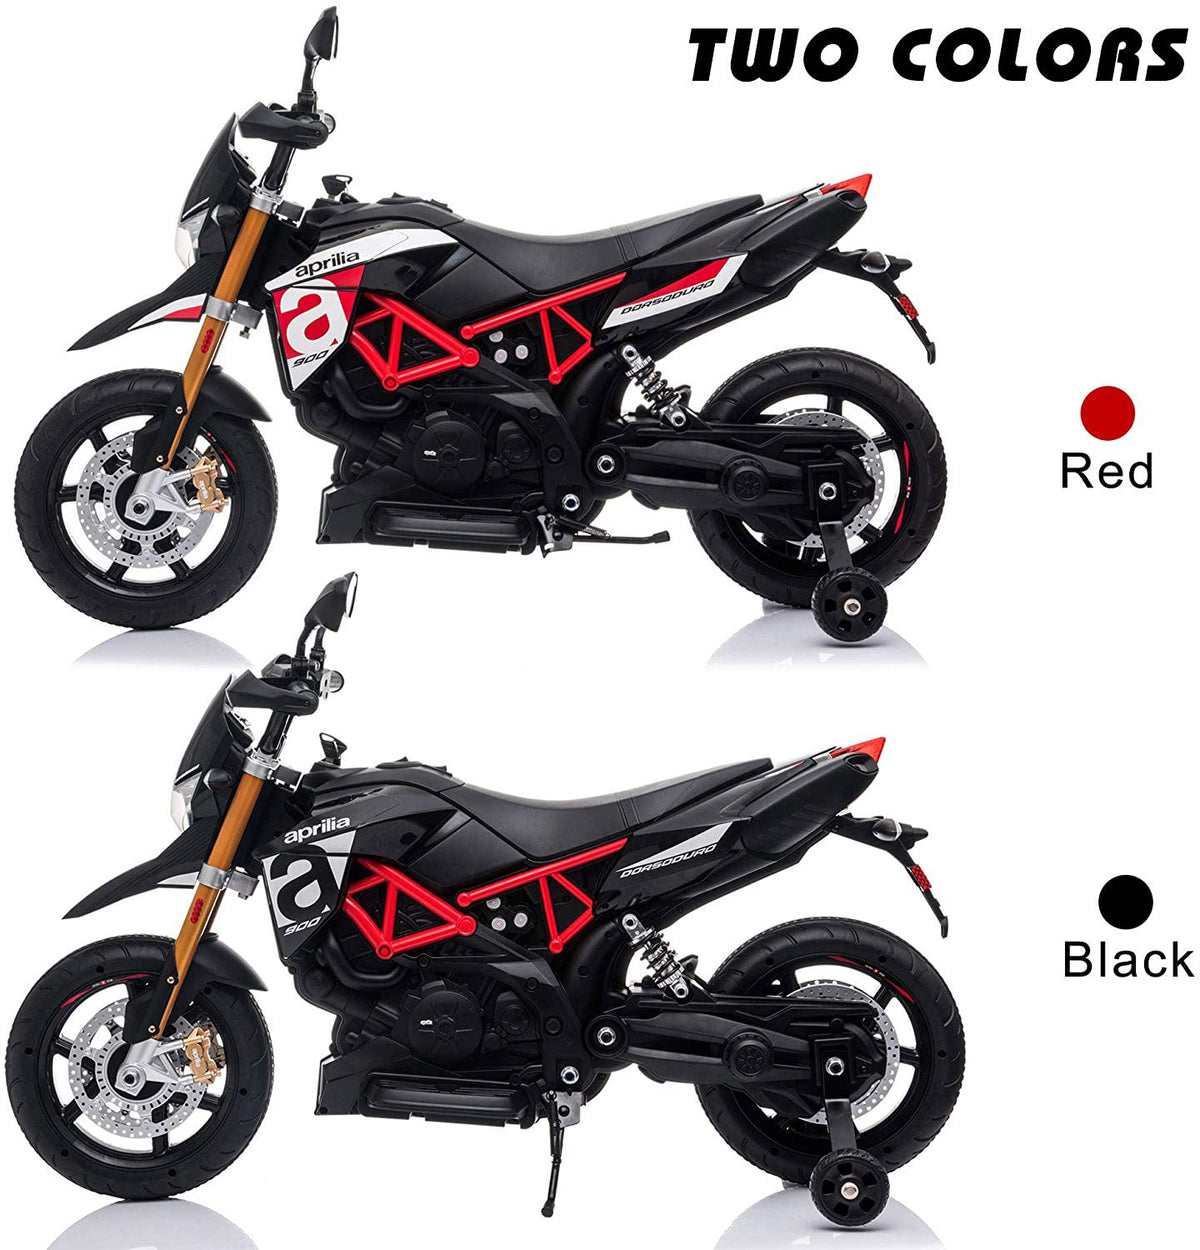 12V Kids Ride-On Motorcycle, Battery Powered Dirt Bikes for Kids with Lights, Music Story USB MP3